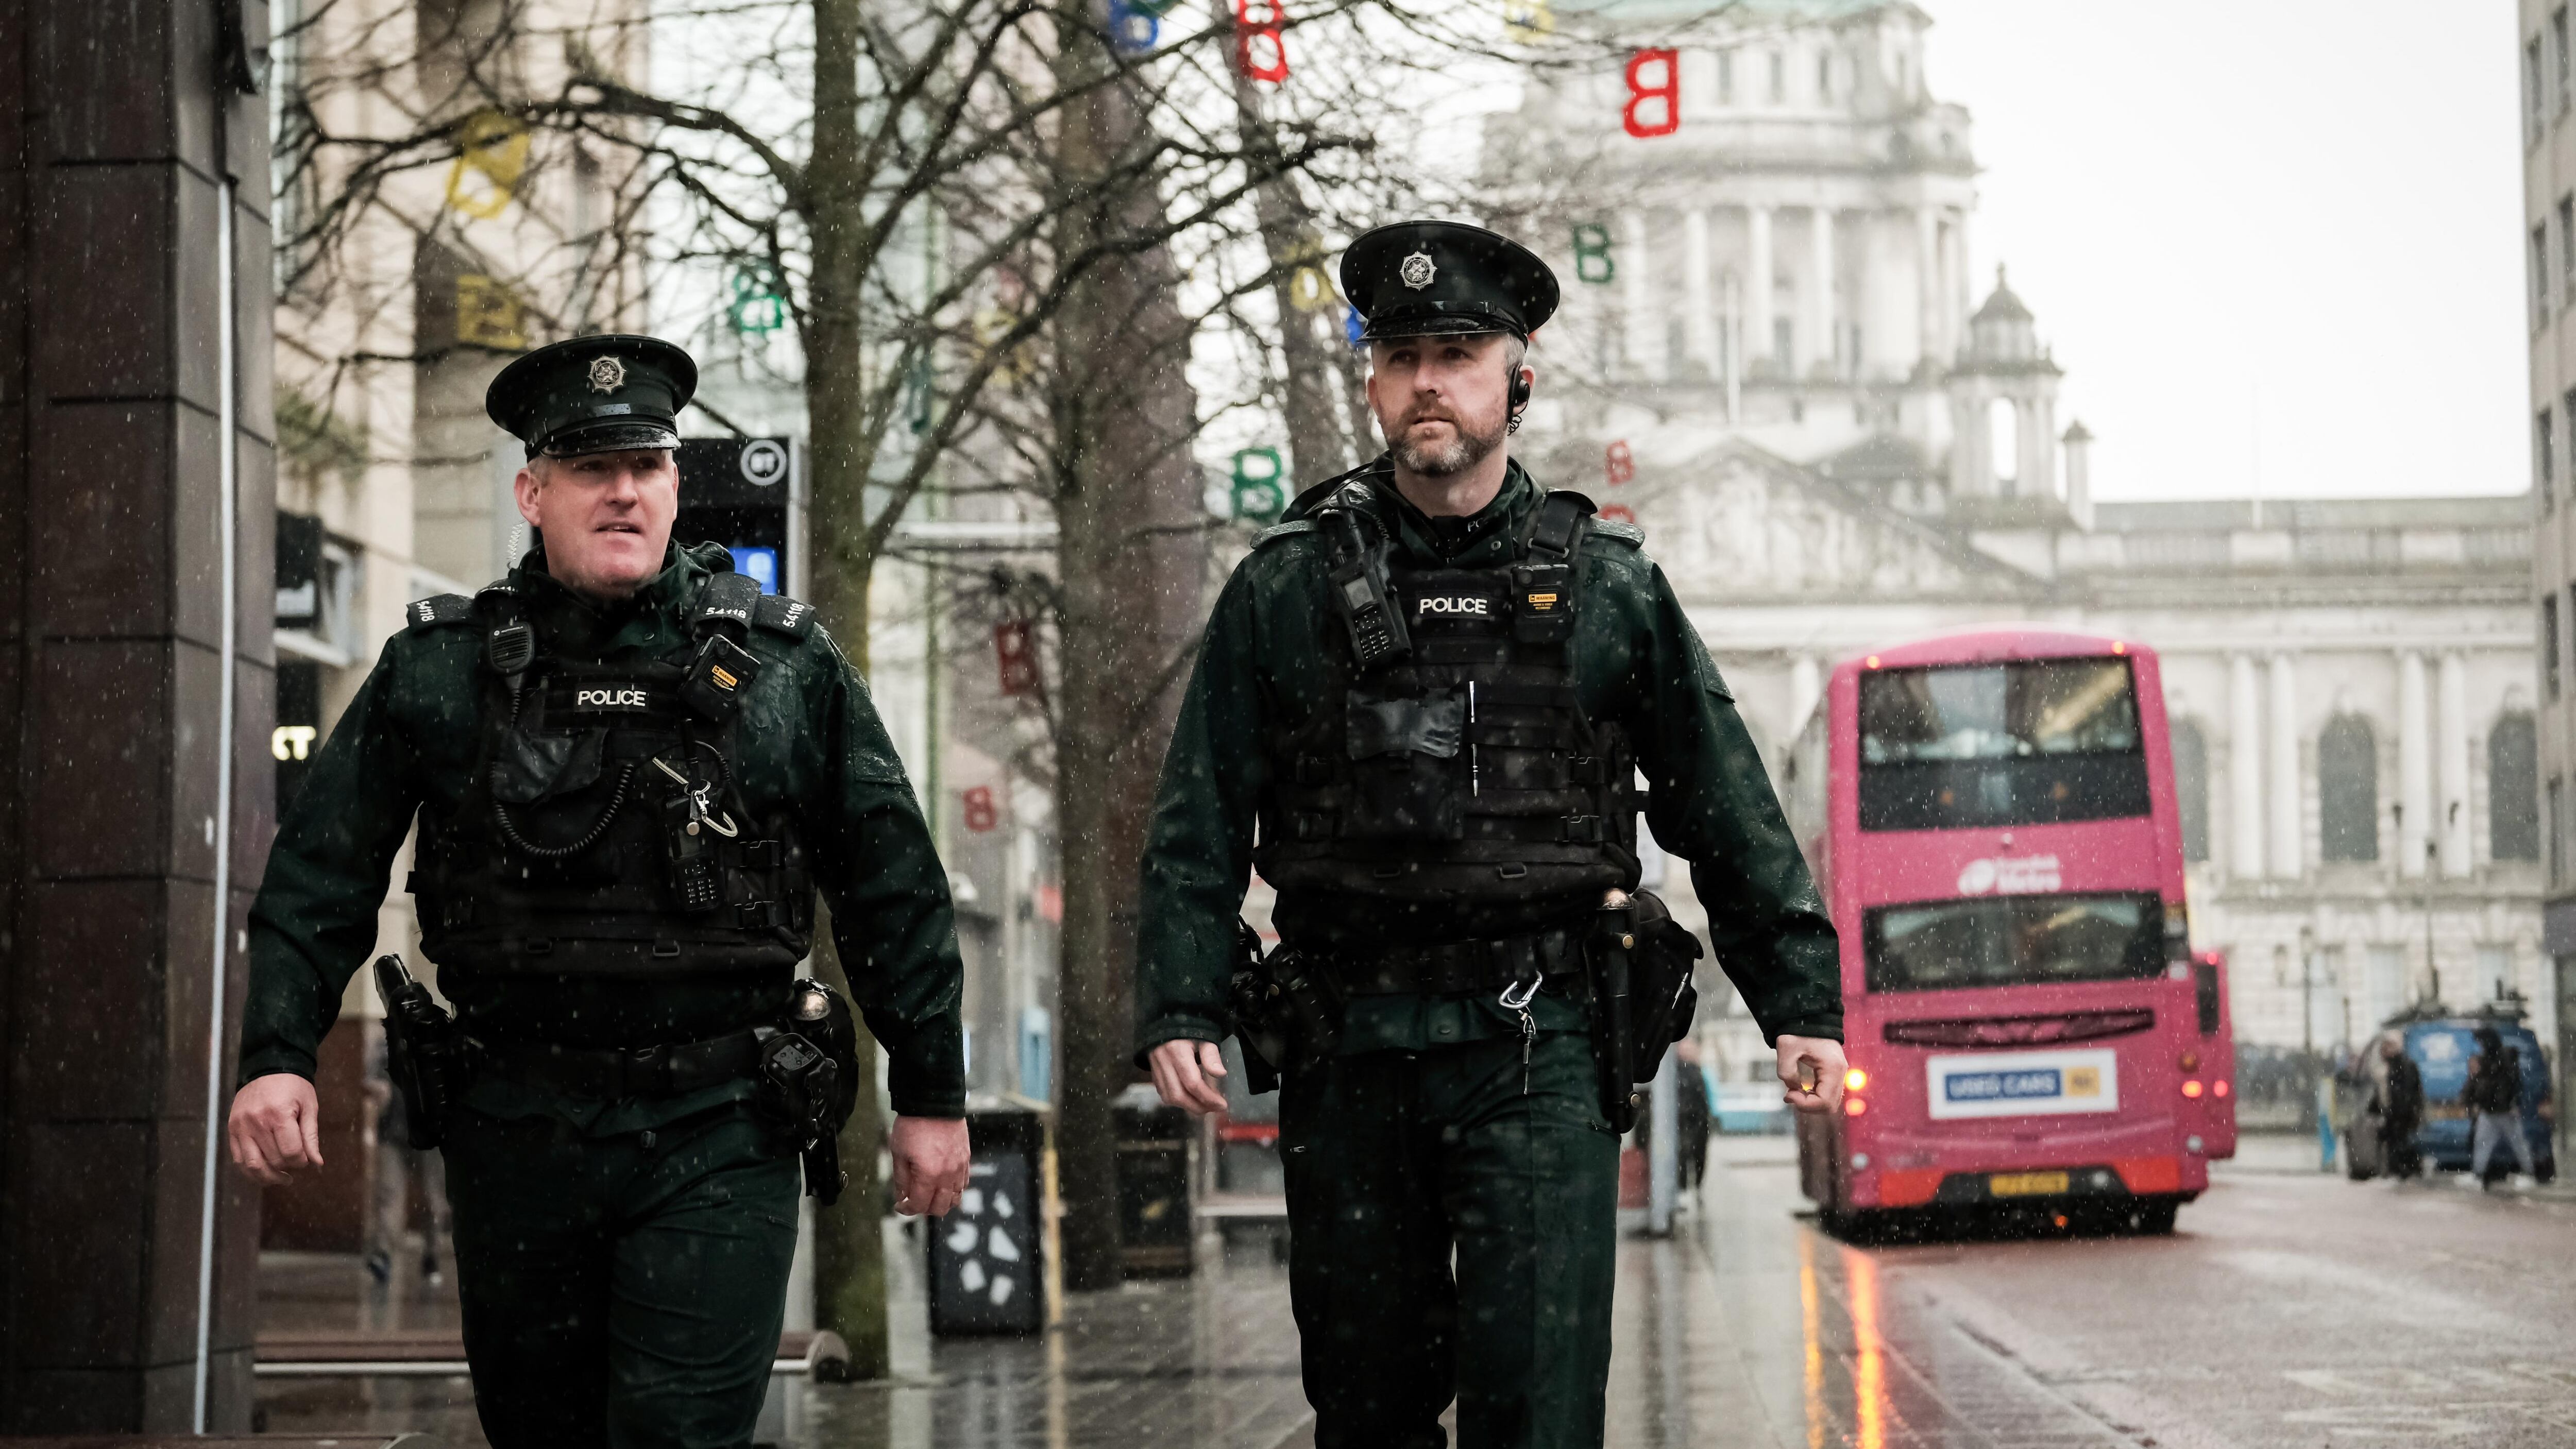 PSNI officers on patrol in Belfast as part of the Safer Business Action Day operation